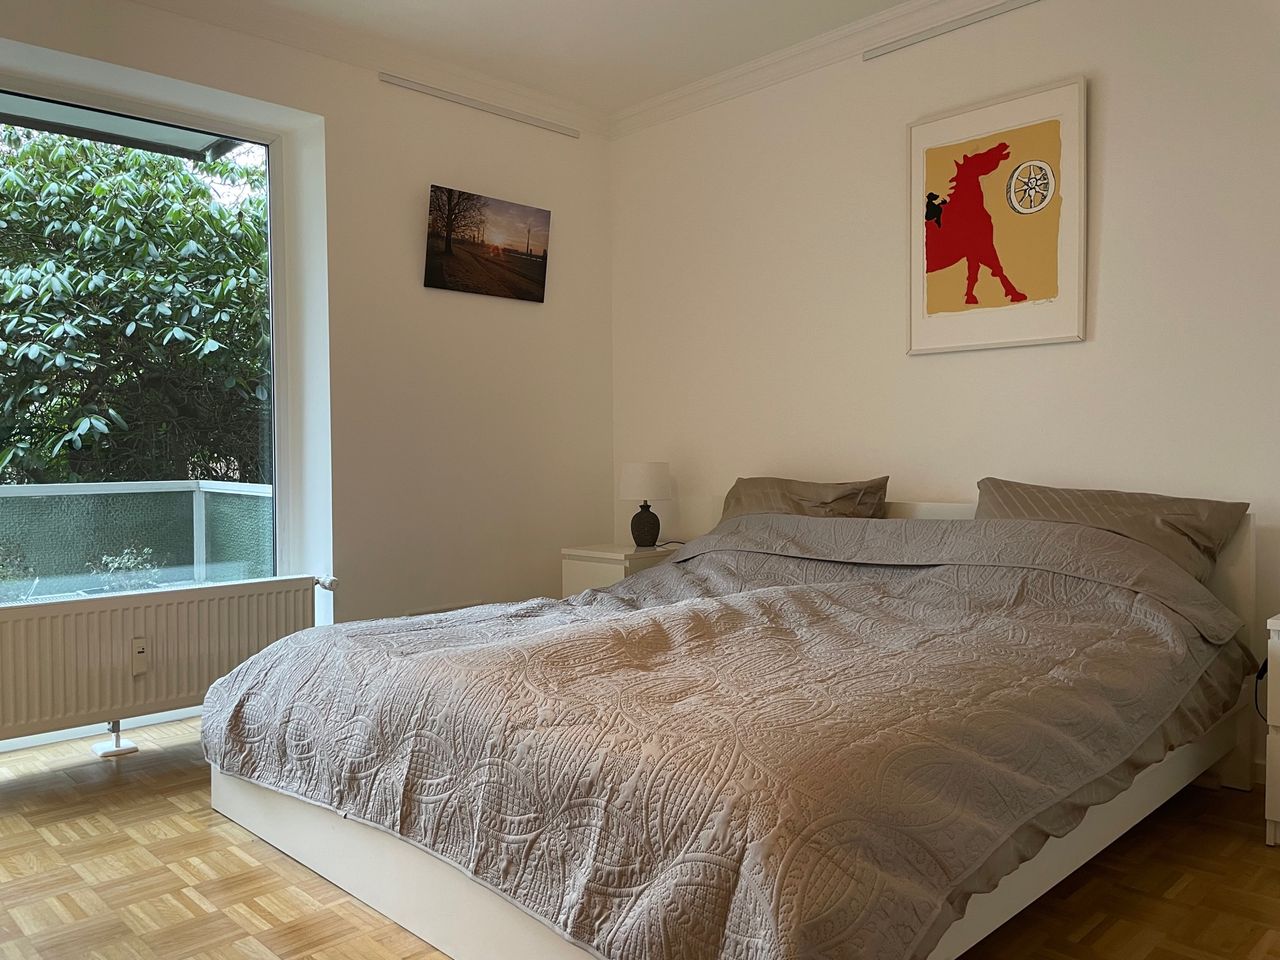 Düsseldorf-Zoo: chic and stylish ground floor apartment, 2 rooms with balcony, 2021 renovated, quiet but still central